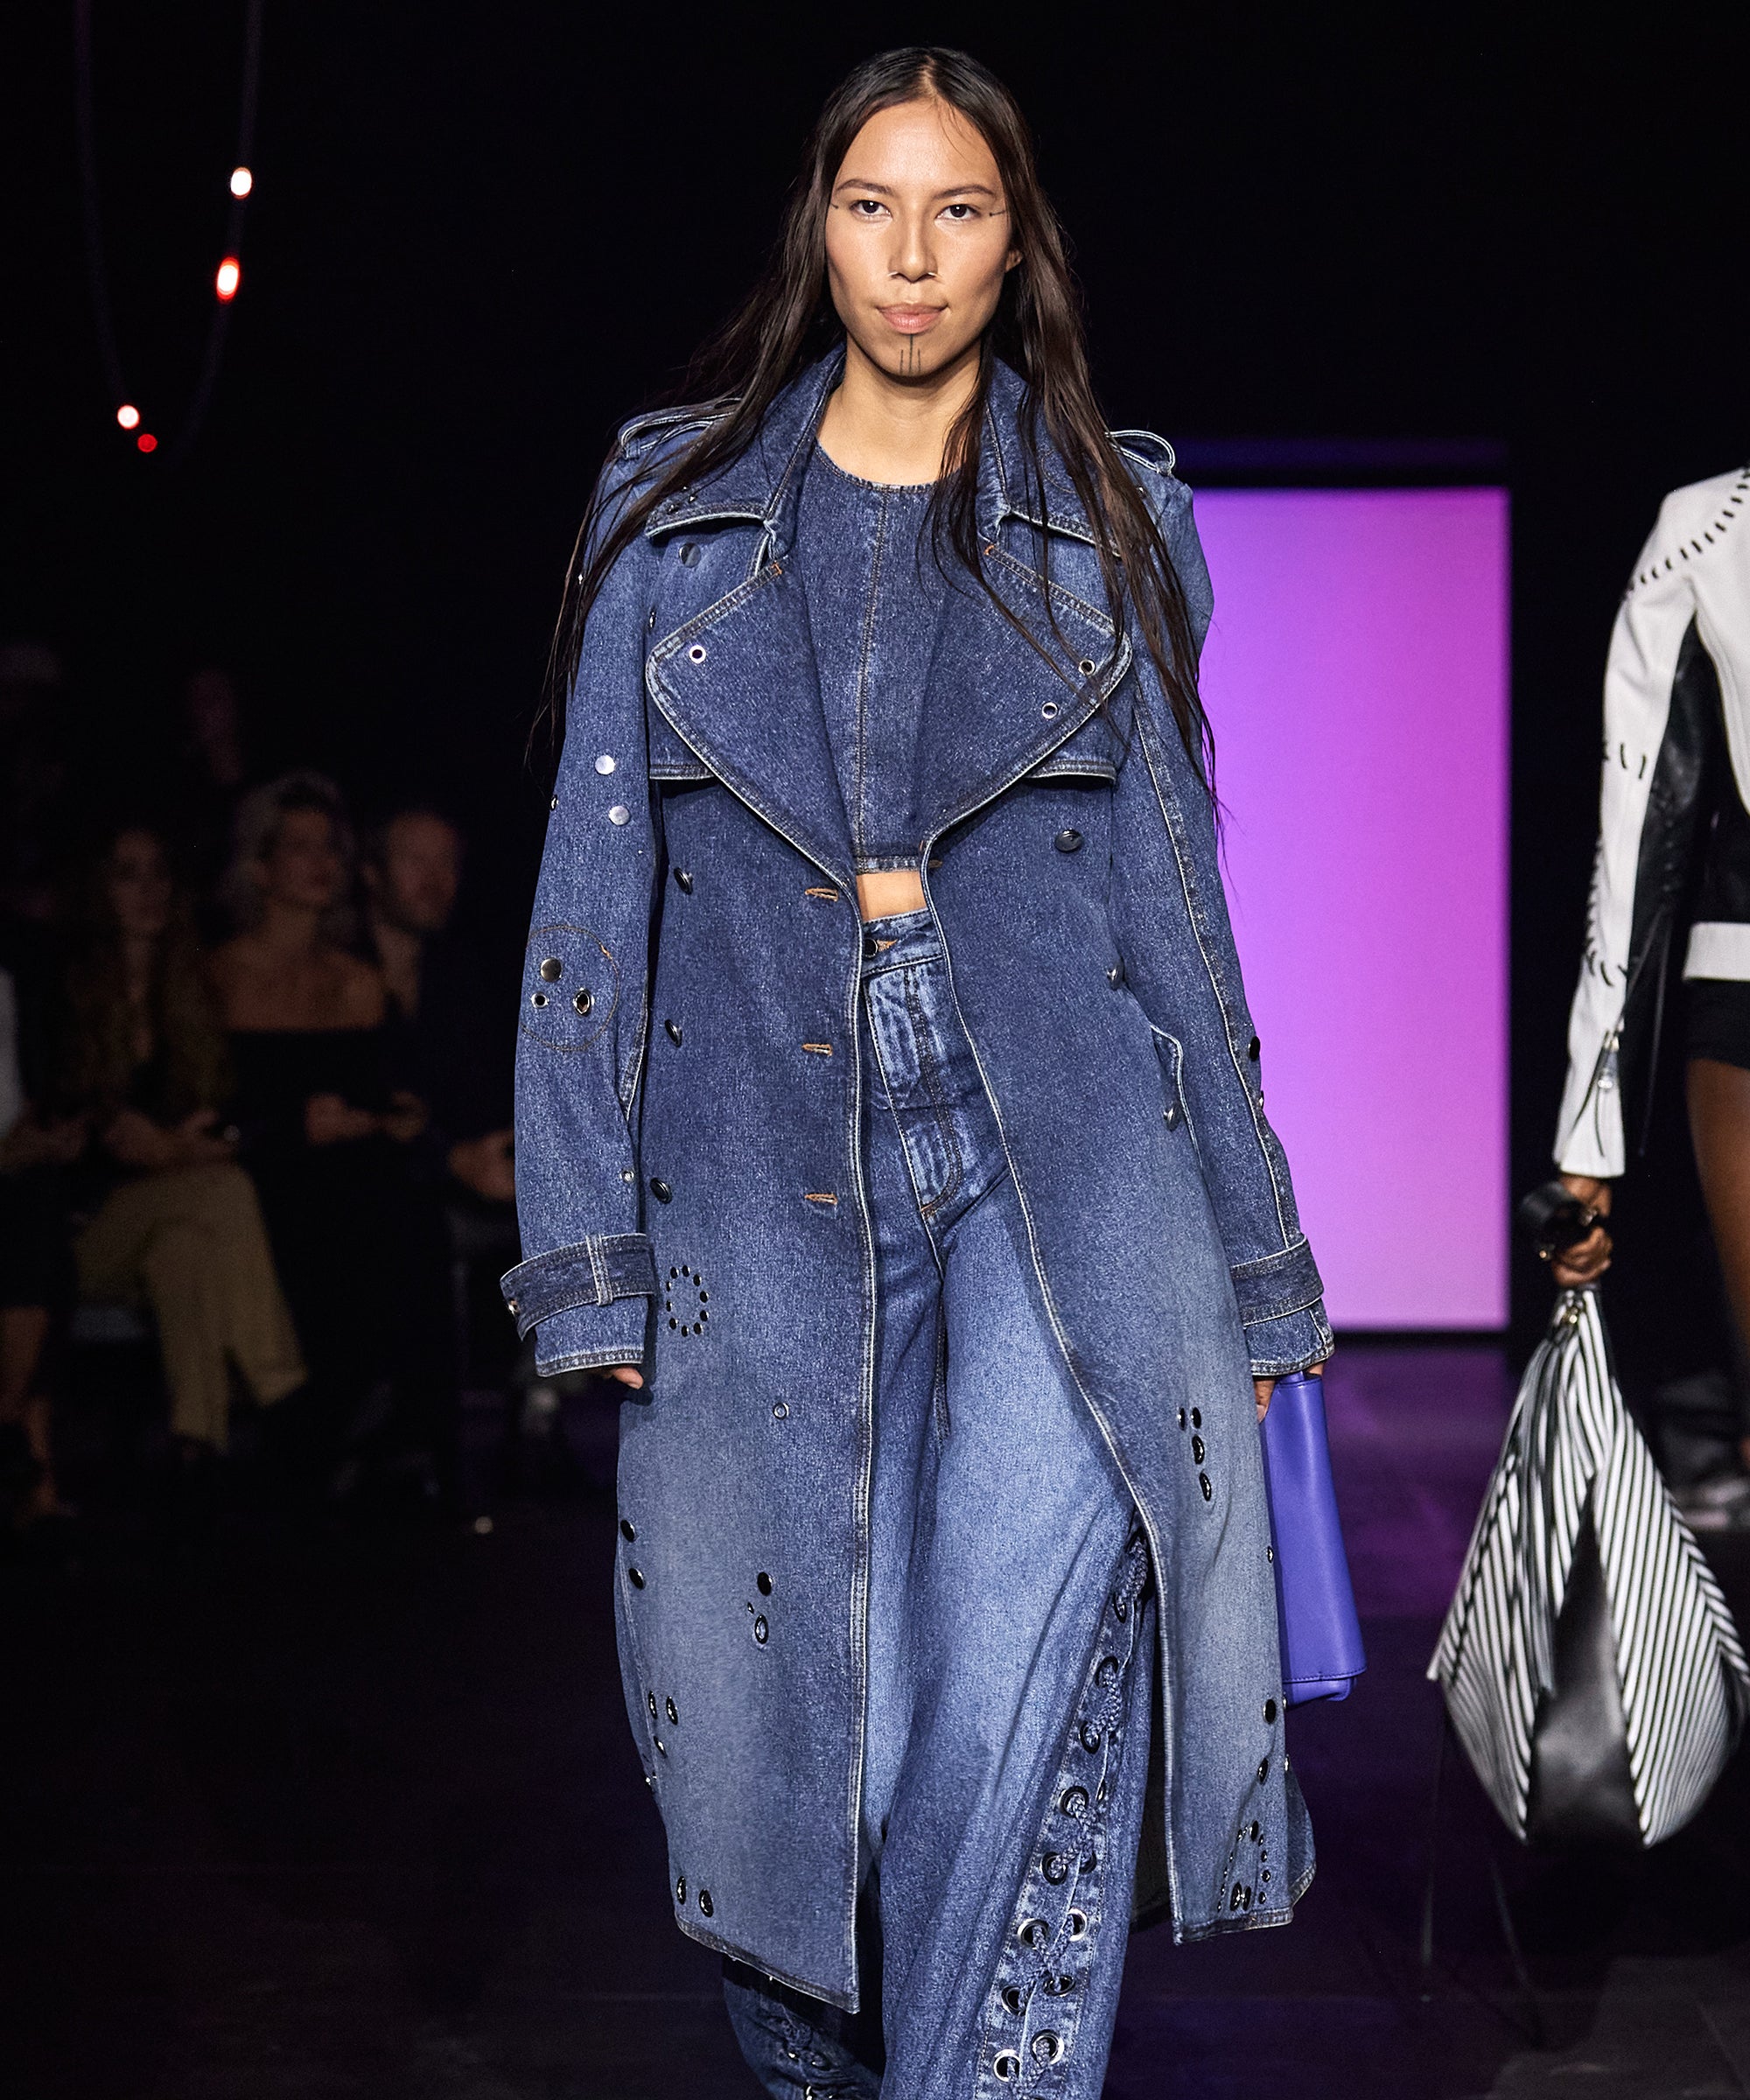 6 of the Biggest Bag Trends From the Spring 2023 Runways